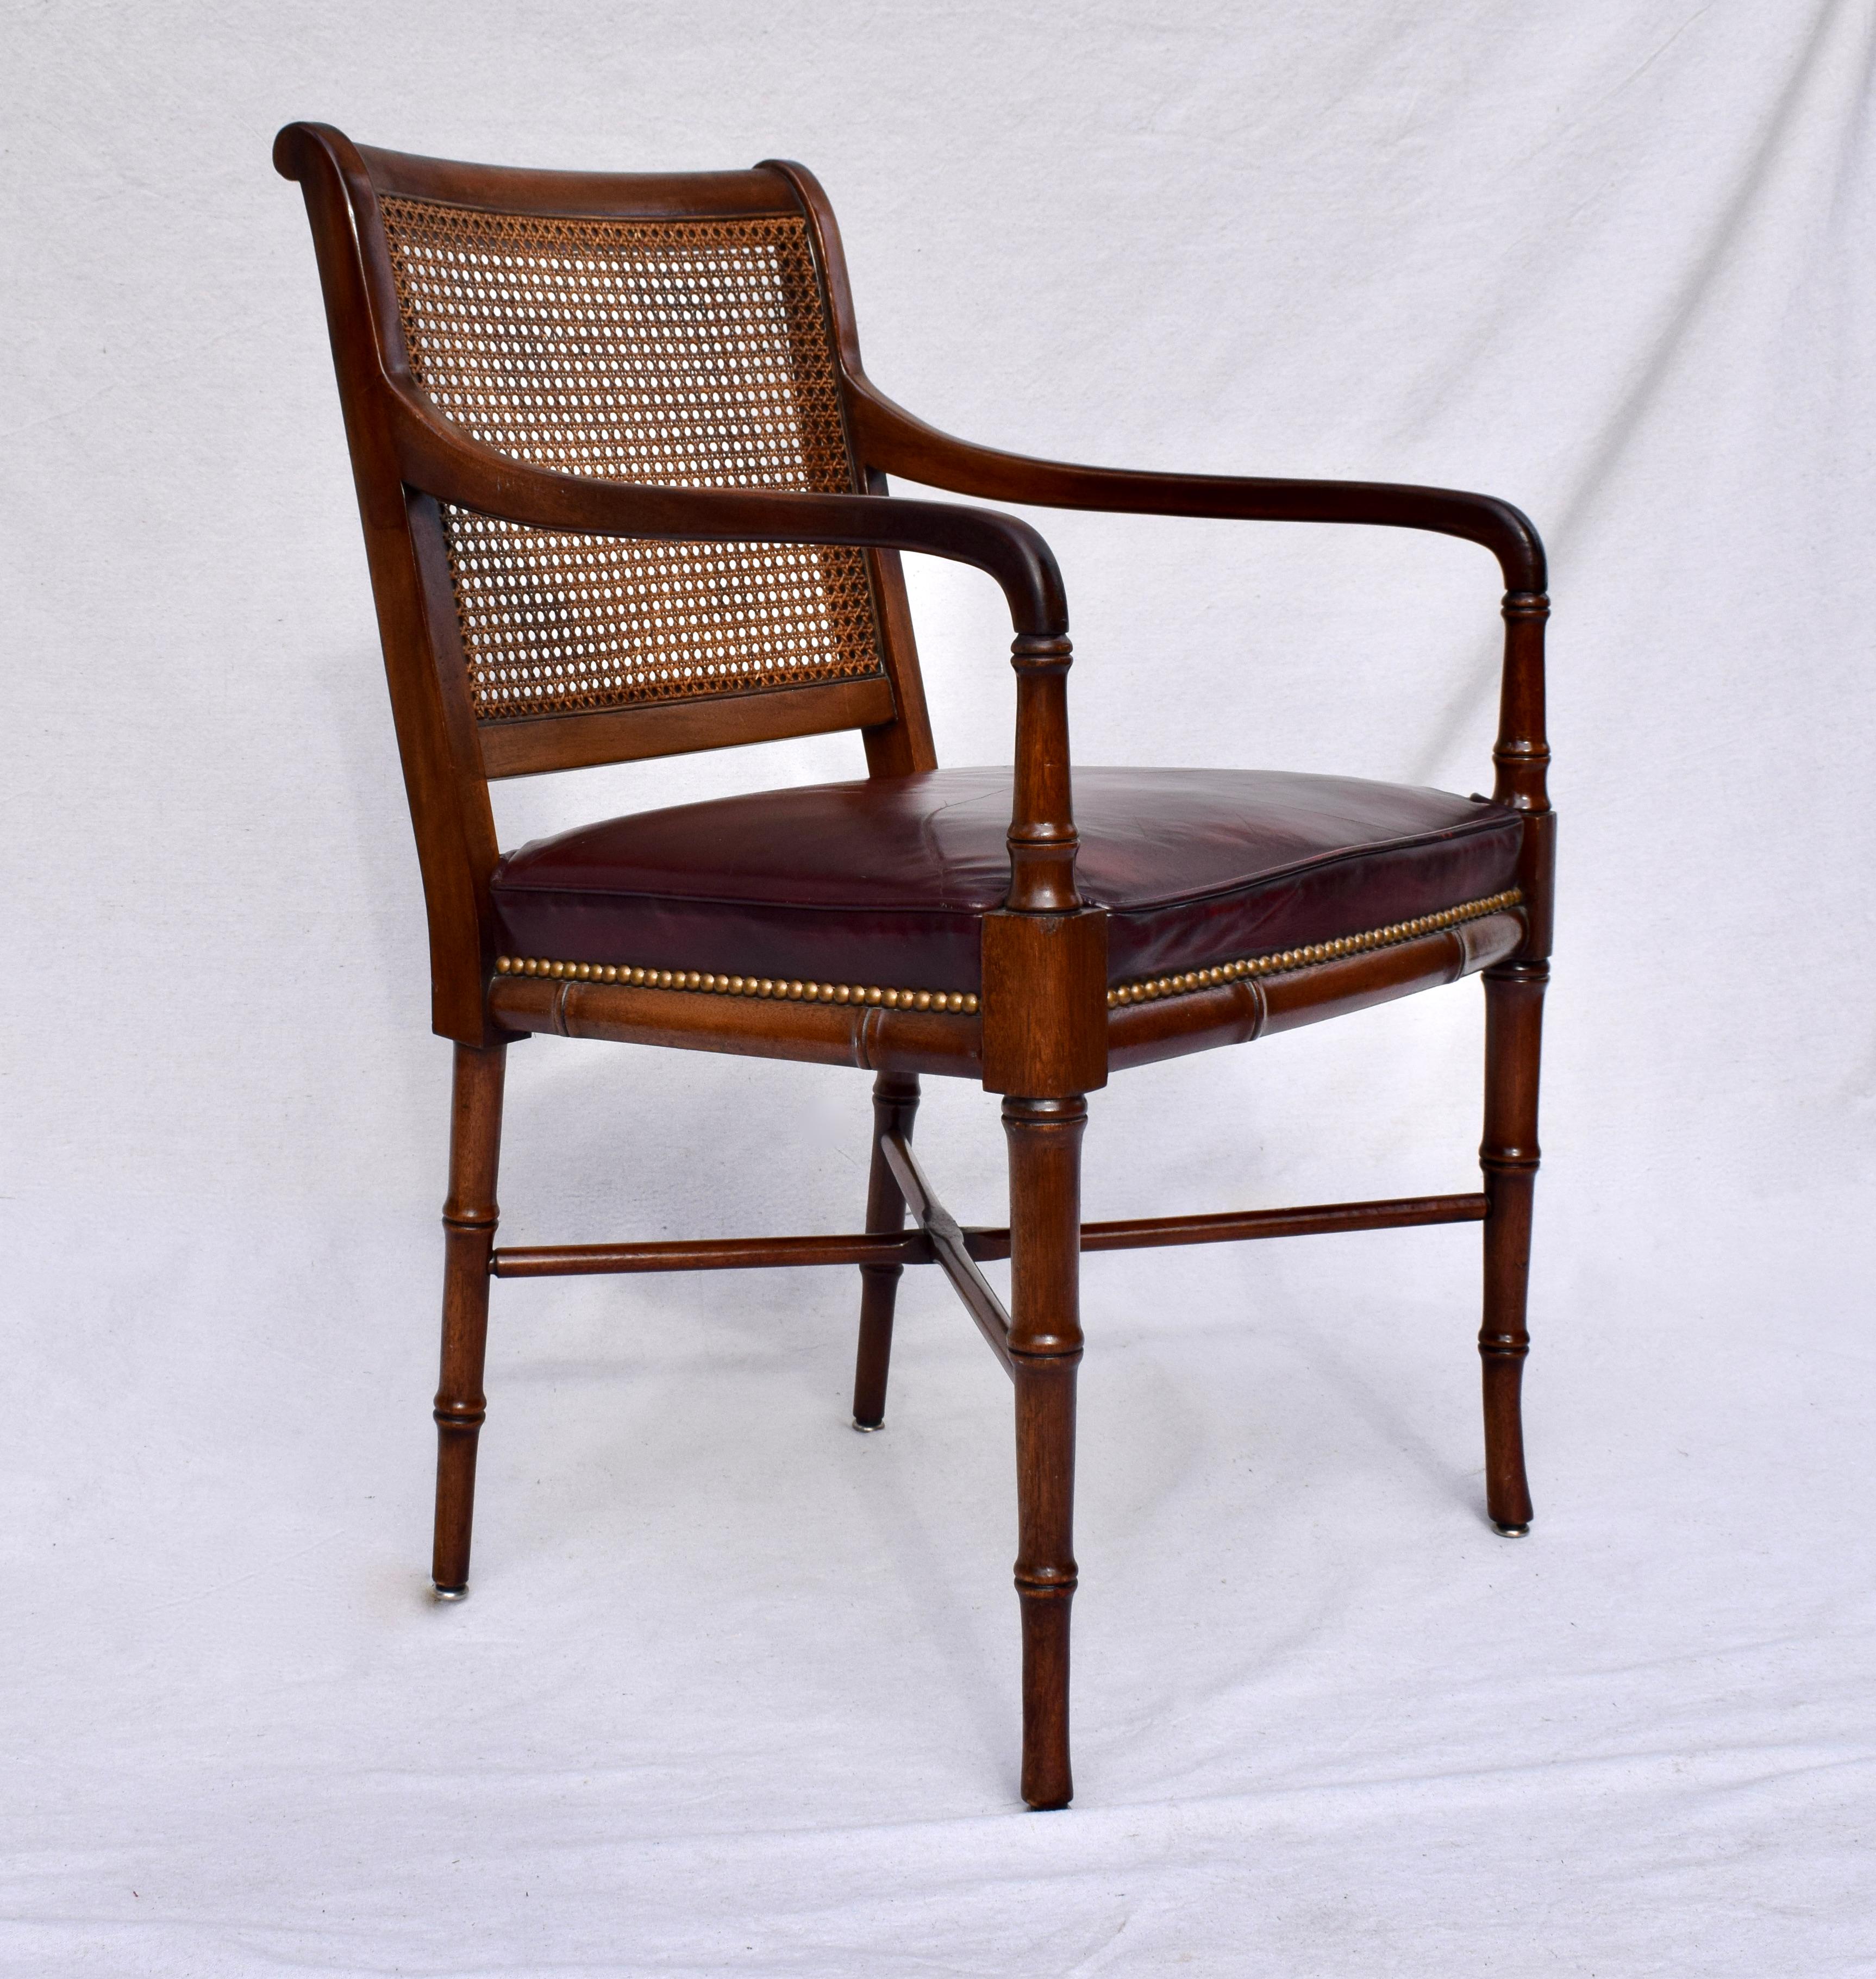 Regency style arm chair by Hickory Chair. Features include caned back, leather seat with brass tacks, X base stretcher & solid Mahogany faux bamboo frame. Suitable for desk, dining and occasional uses.